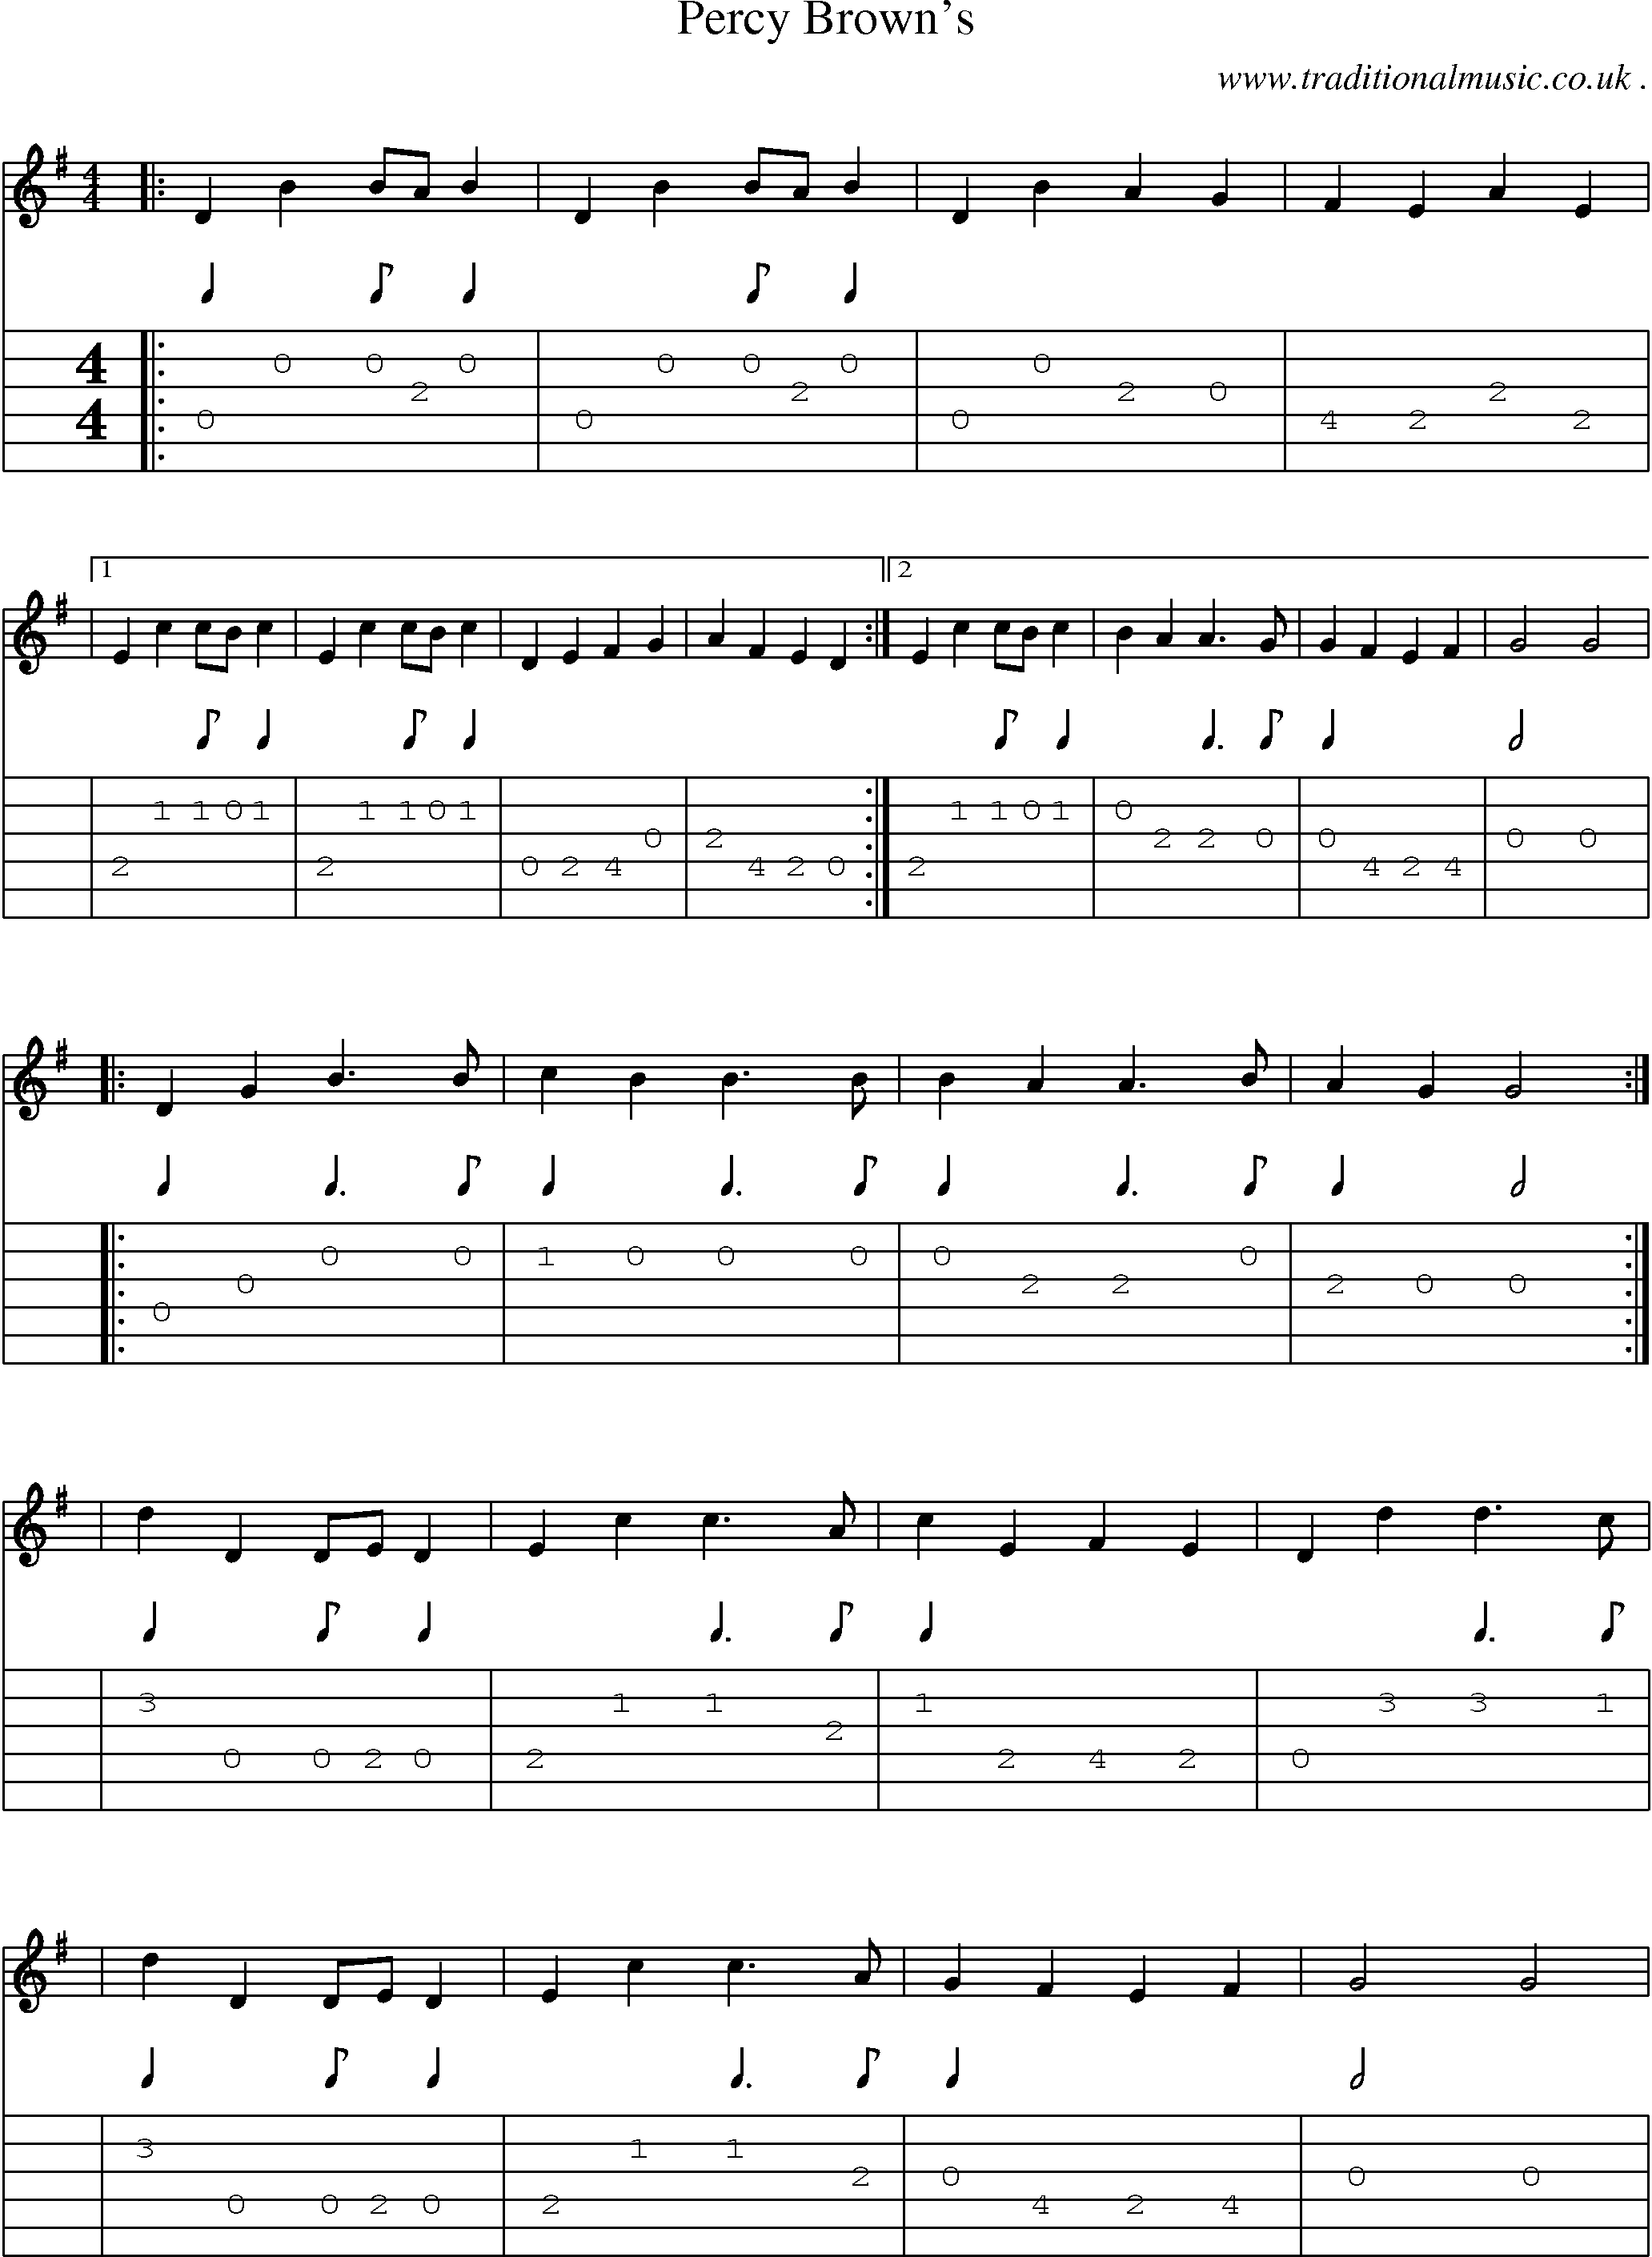 Sheet-Music and Guitar Tabs for Percy Browns